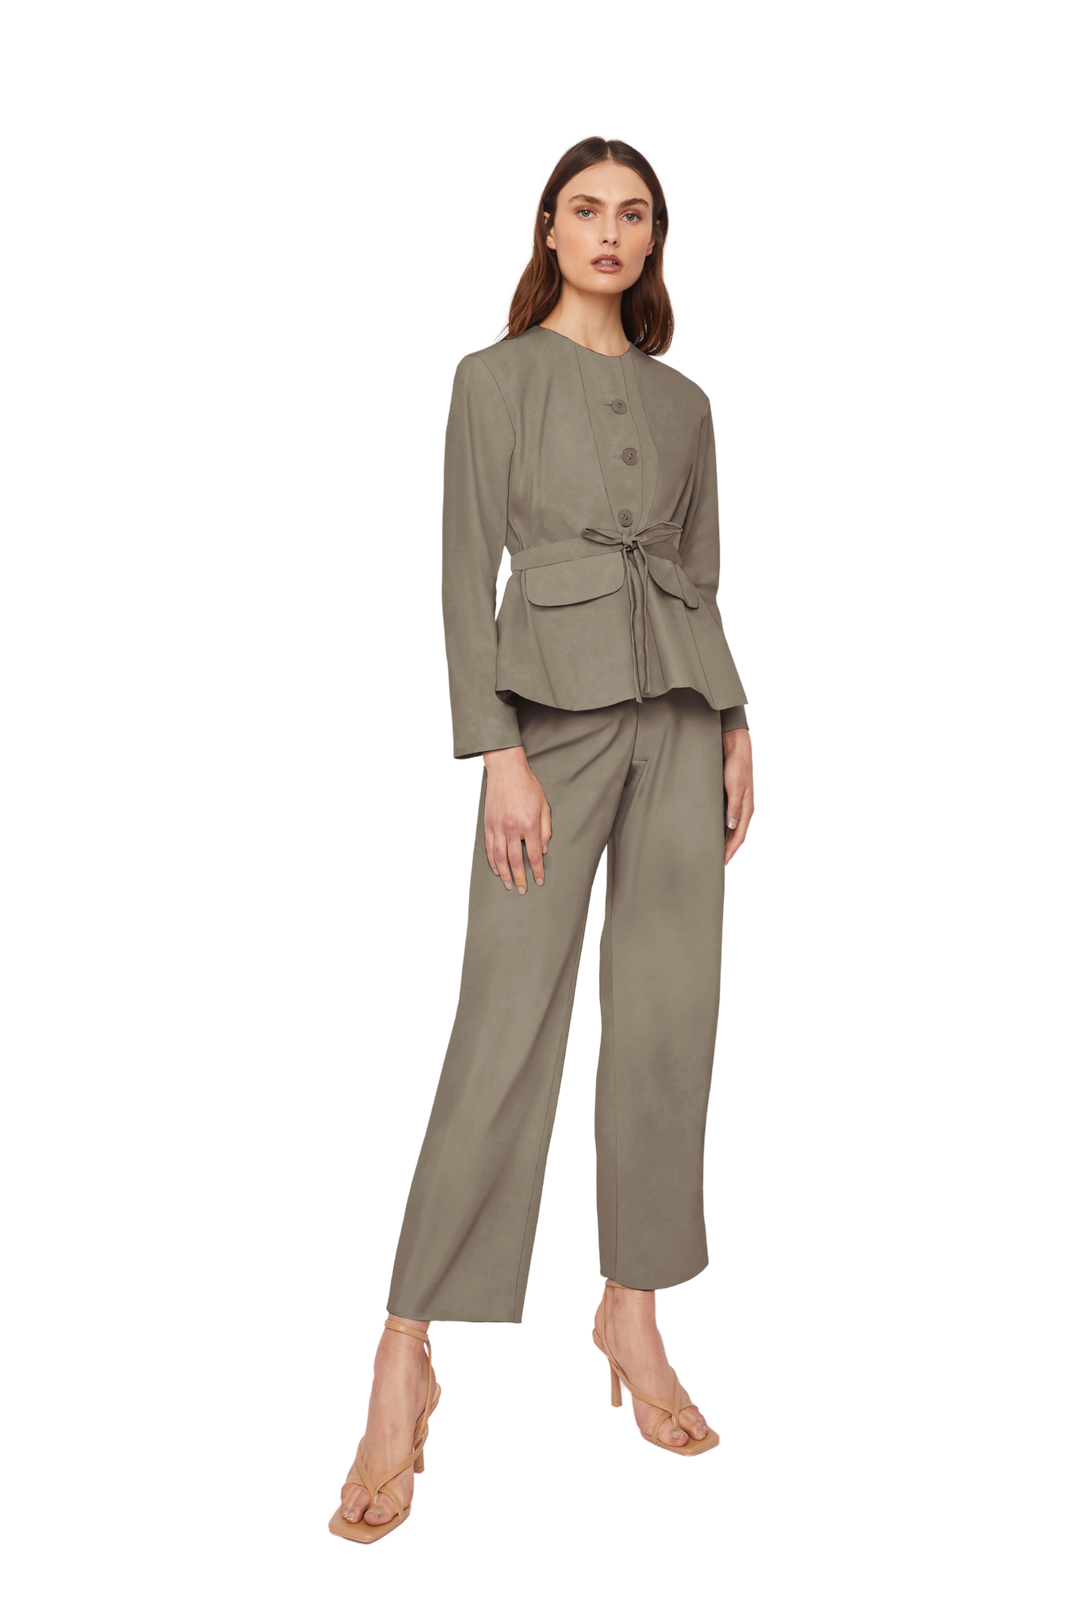 Collarless Jacket with Flap Pockets and Drawstring Waist in Stratton Khaki Solid Organic Cotton Twill - STEF MOUCHIE